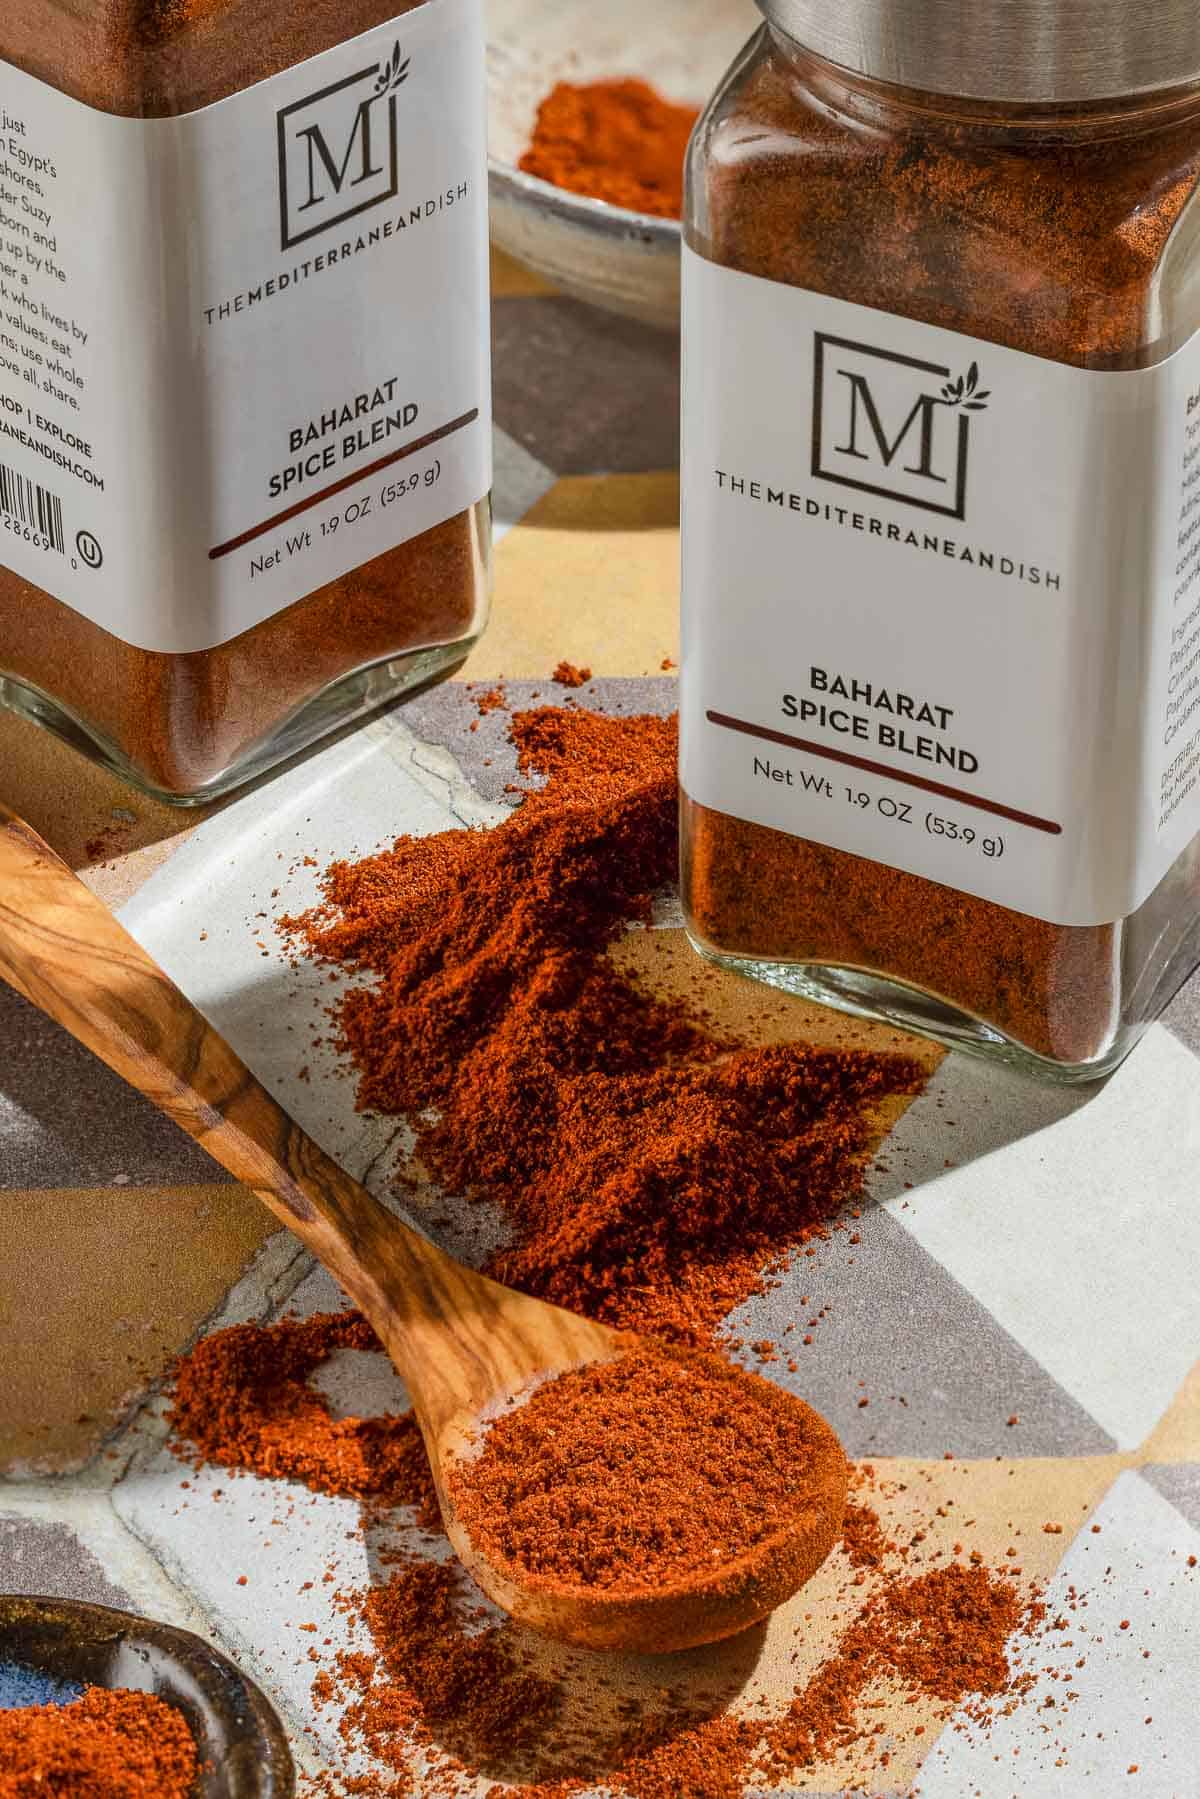 Baharat spice blend on a spoon and in a small bowl. Next to this are two jars of the spice from The Mediterranean Dish.